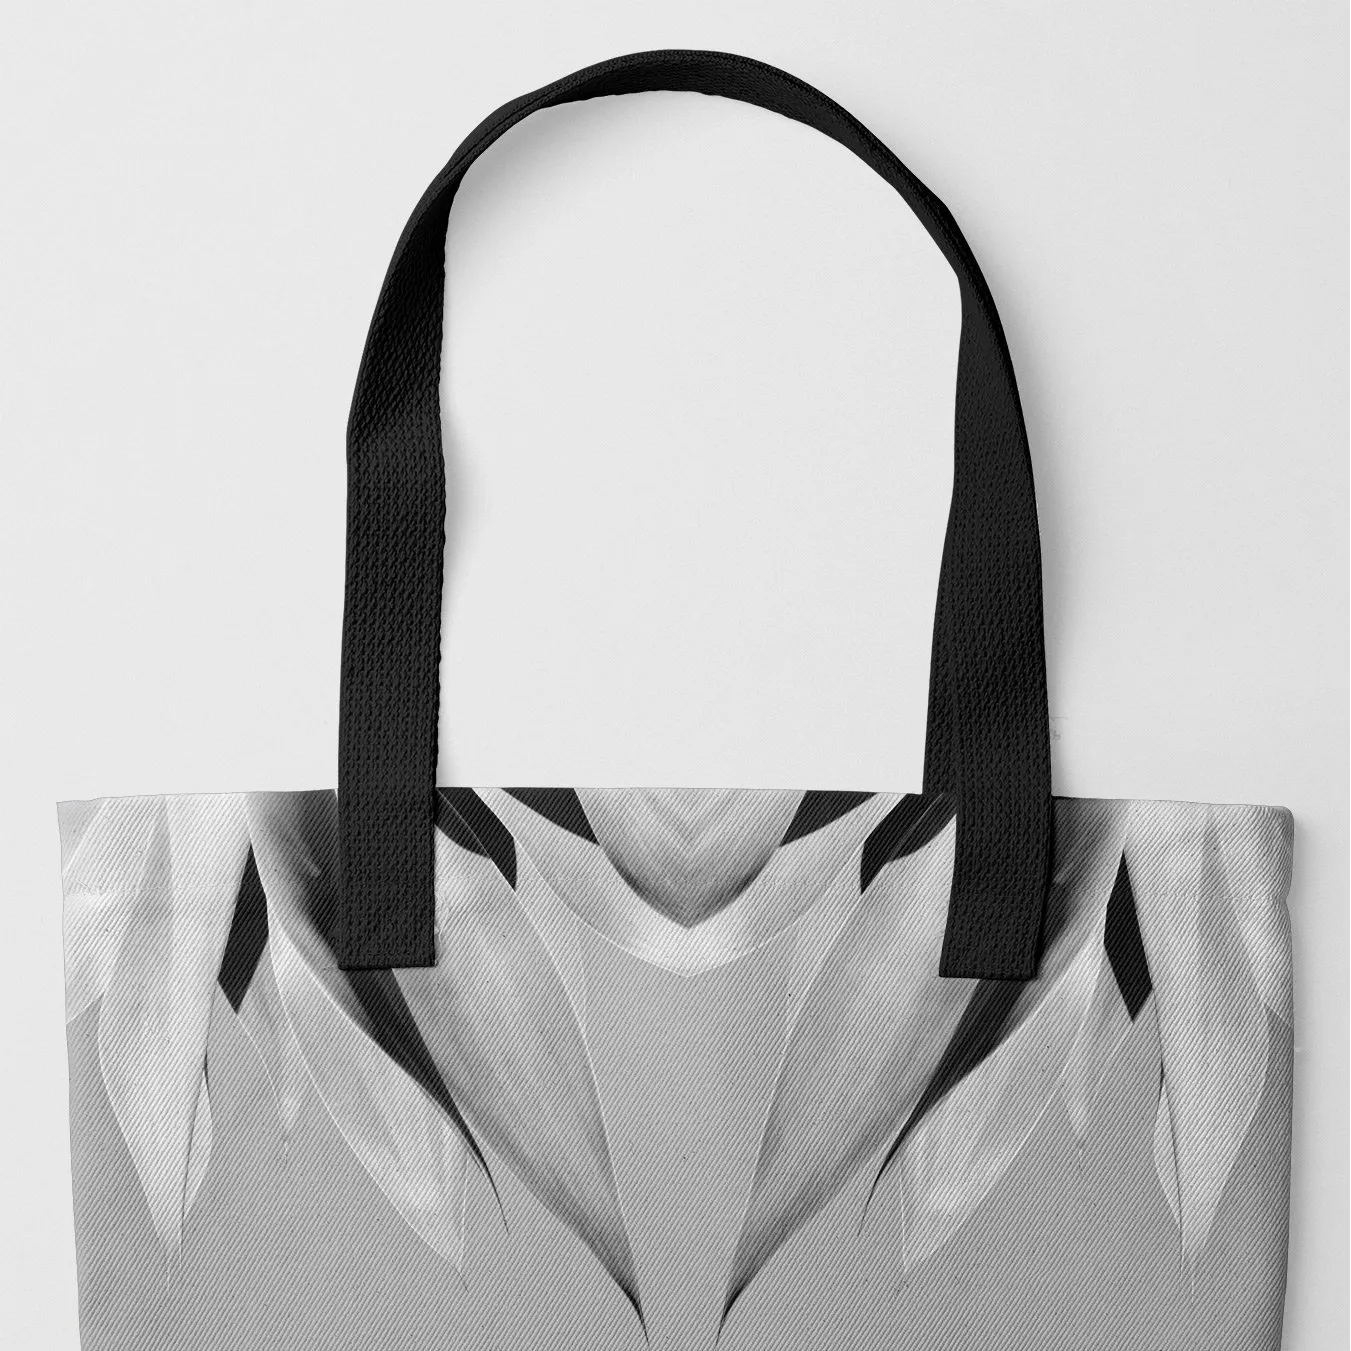 In Bloom - Trippy Succulent Black And White Art Tote - Black Handles - Tote Bags - Aesthetic Art